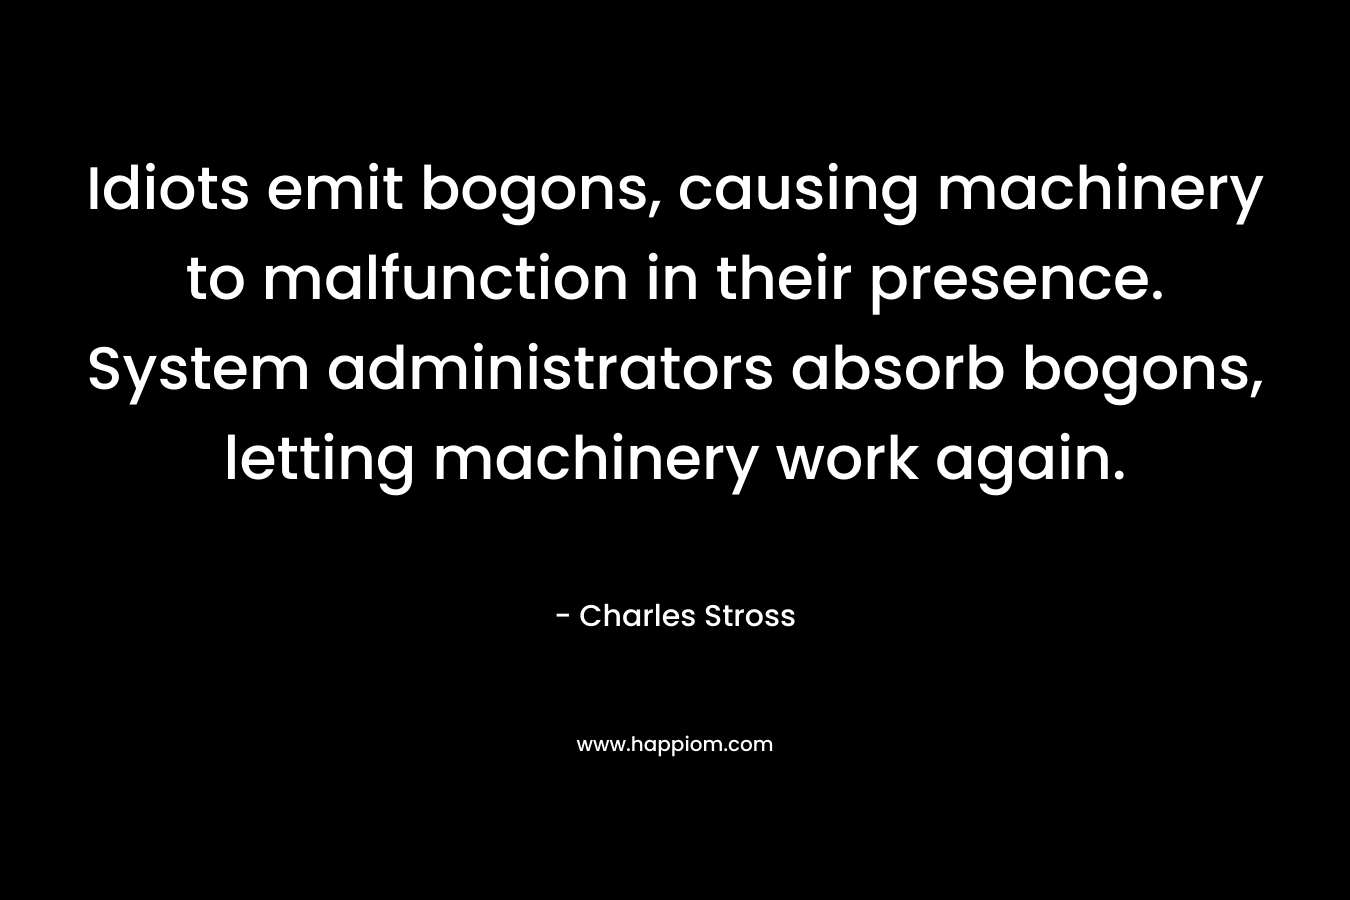 Idiots emit bogons, causing machinery to malfunction in their presence. System administrators absorb bogons, letting machinery work again. – Charles Stross